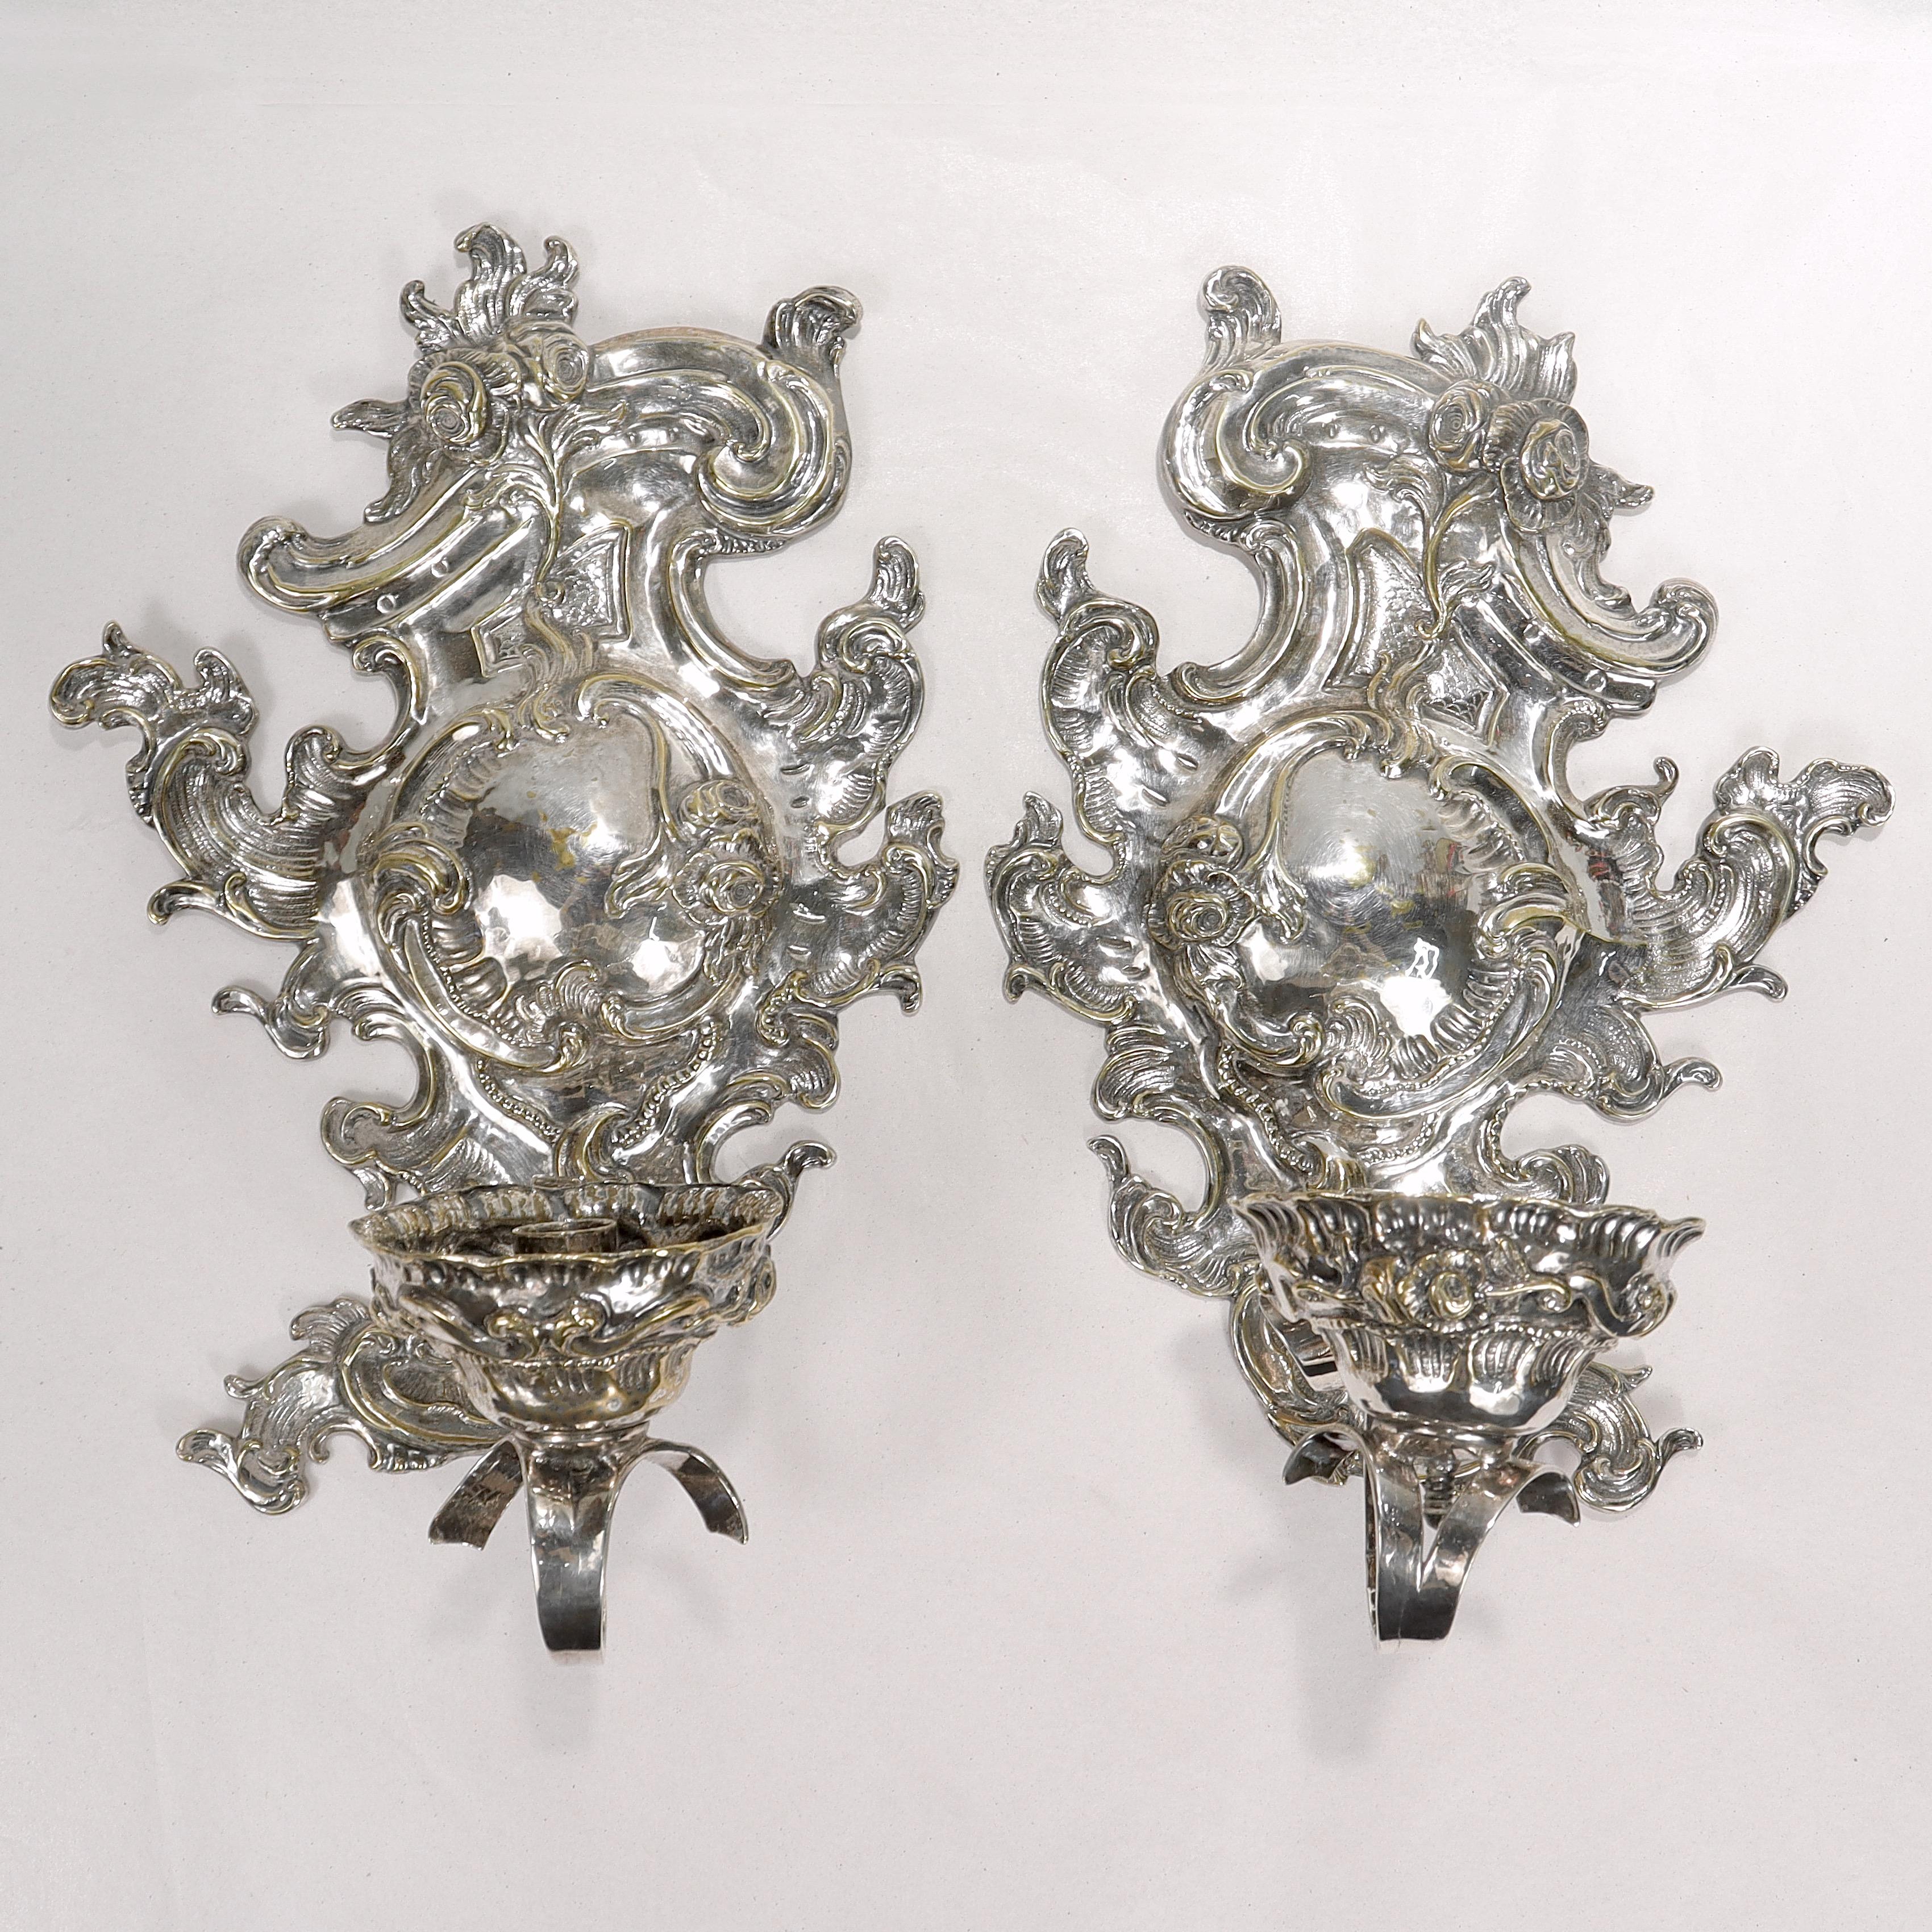 19th Century Antique Rococo or Rococo Revival Silver Plated Wall Sconces For Sale